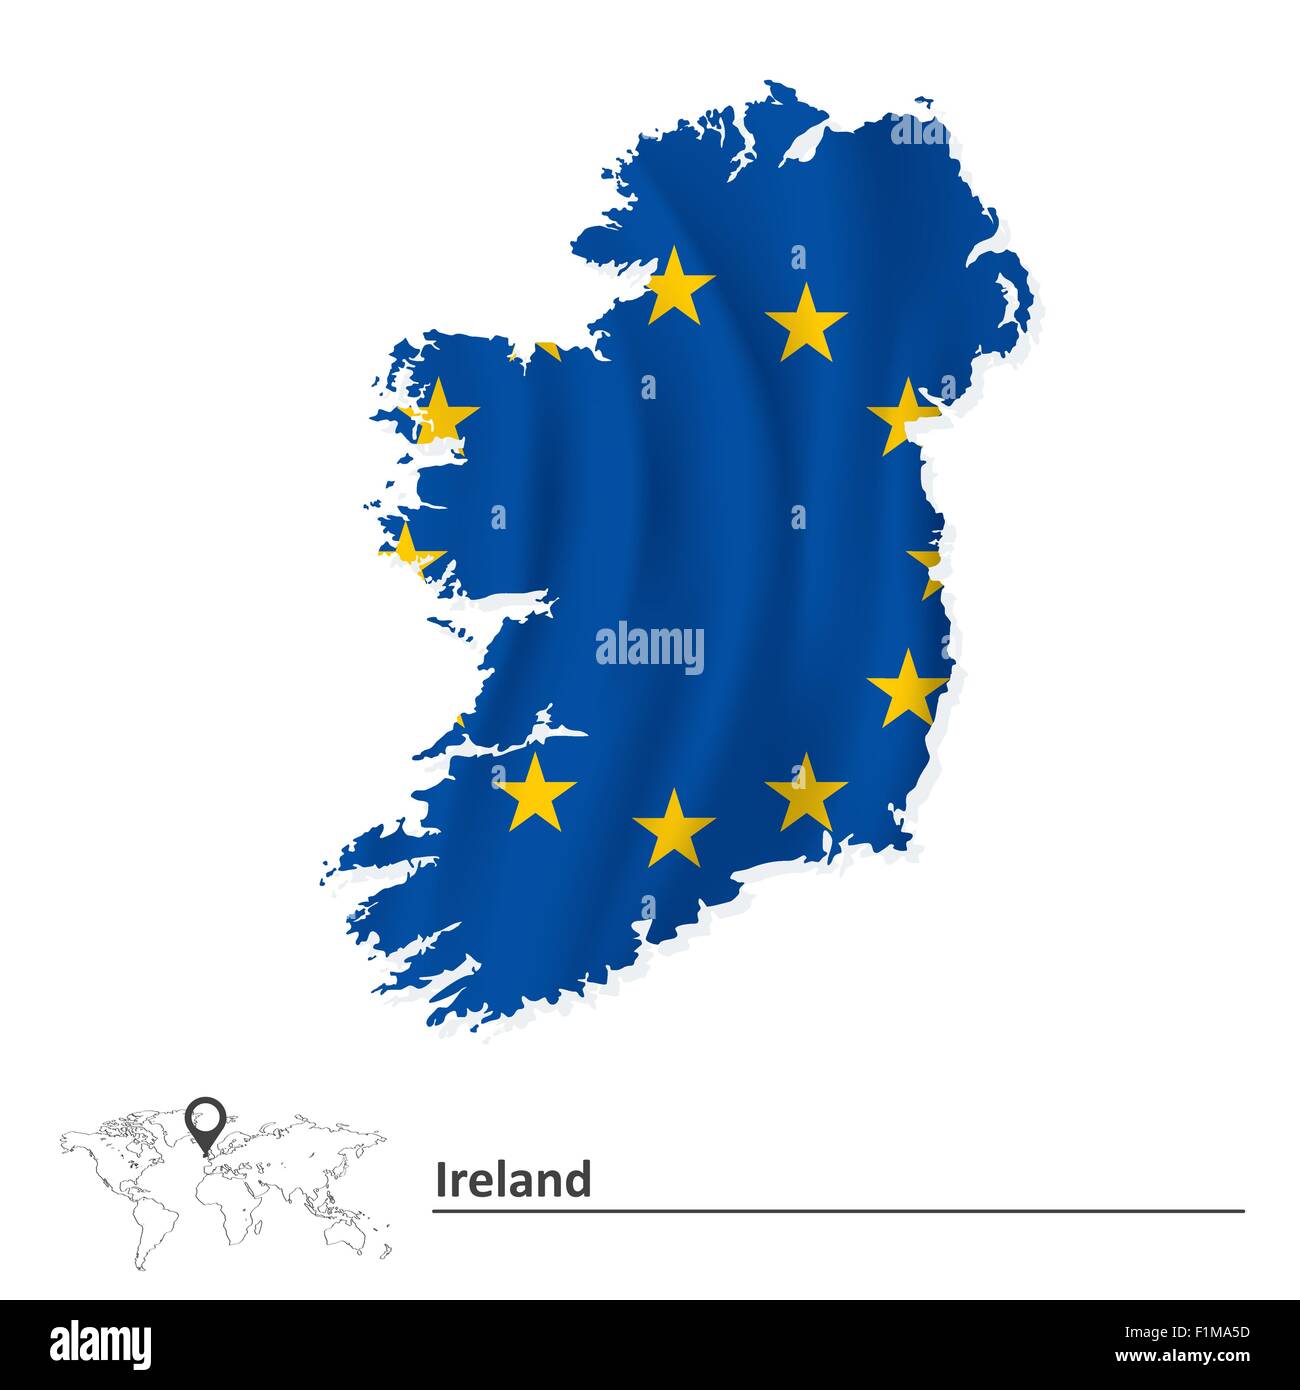 Map Of Ireland With European Union Flag Vector Illustration F1MA5D 